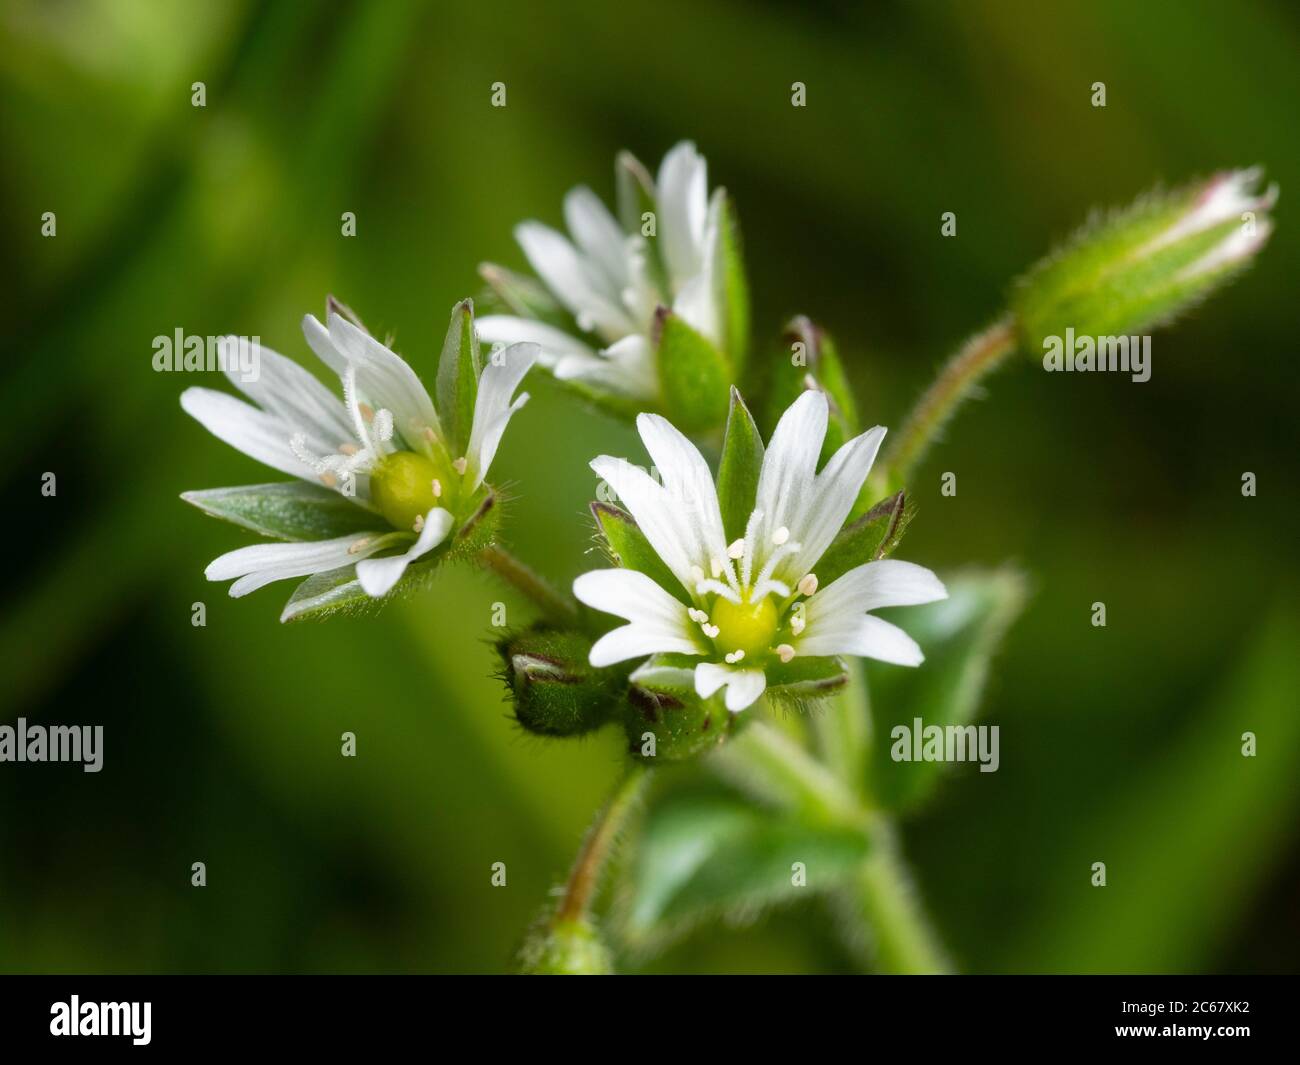 Grey-white flowers of the summer blooming UK wildflower and garden weed, Cerastium fontanum, common mouse-ear Stock Photo